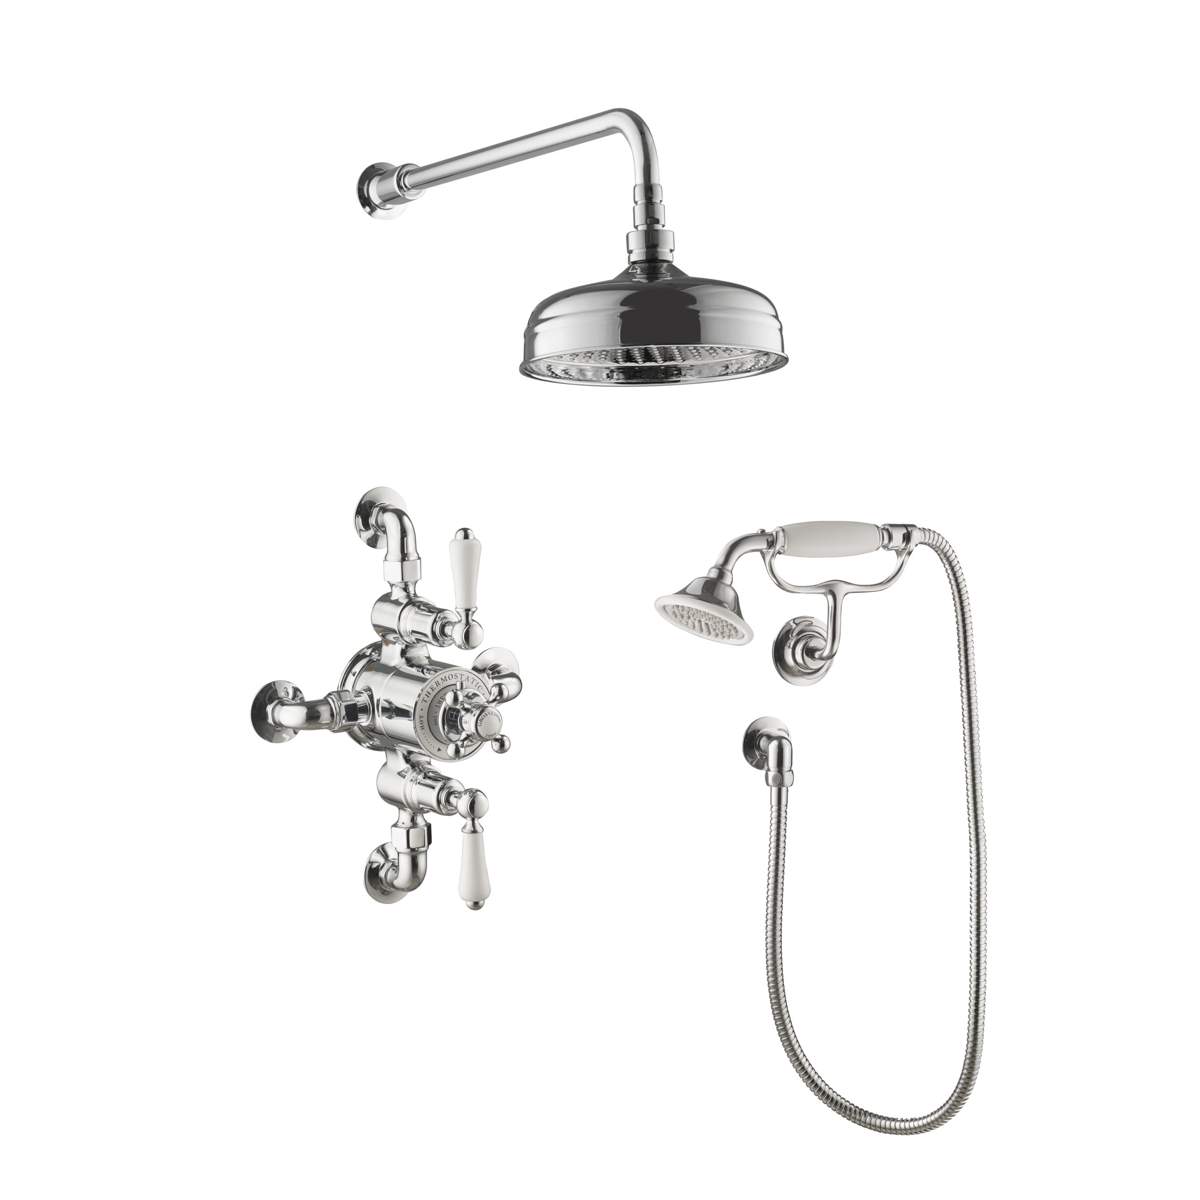 JTP Grosvenor Cross Chrome Exposed Thermostatic Valve with 2 Outlet (GRO281CH)